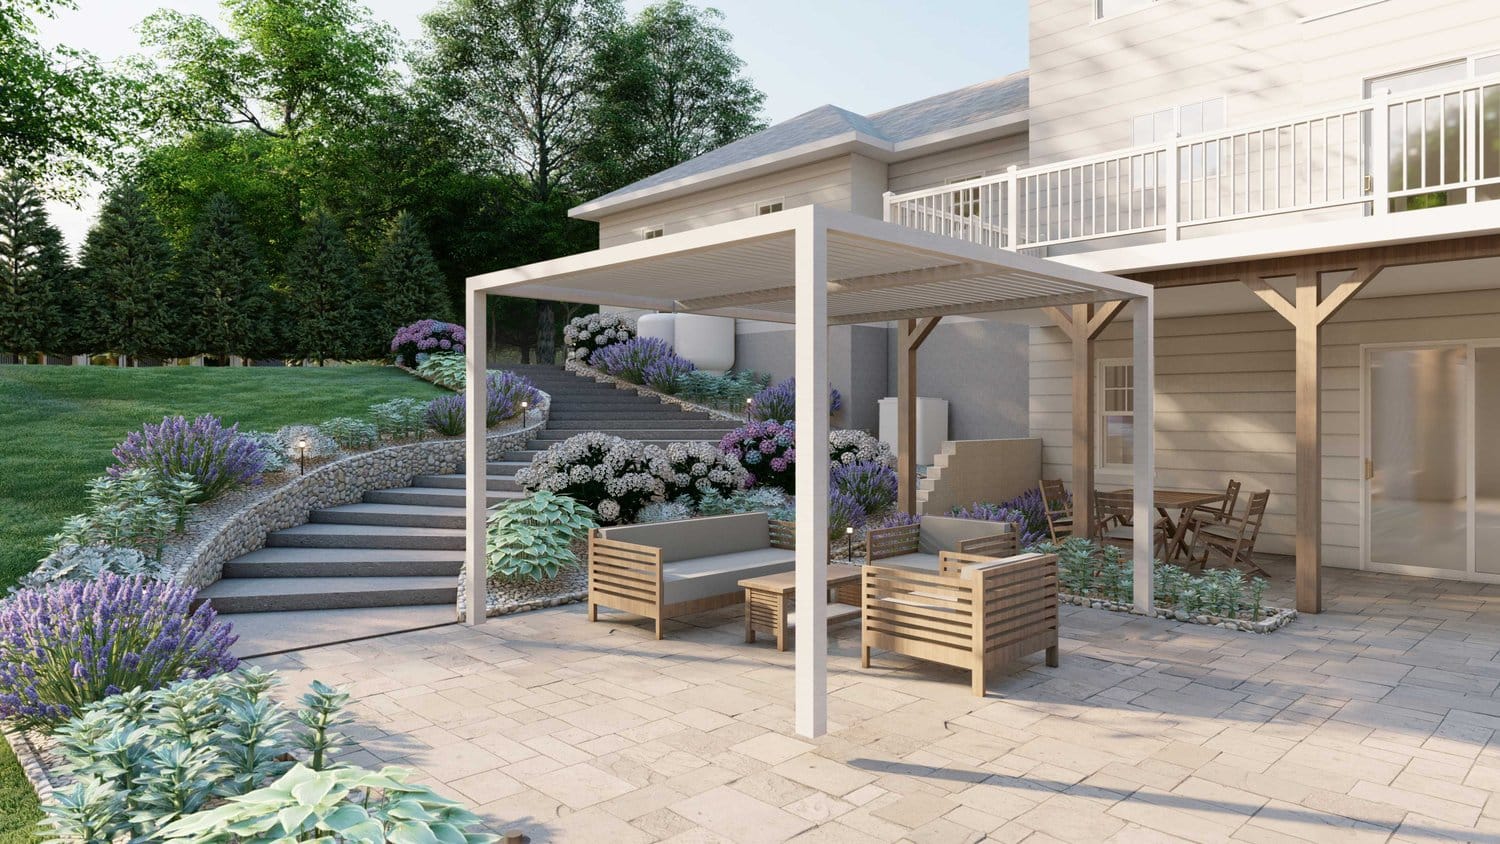 Cambridge yard with patio, pergola, beautiful steps and flowers on both sides